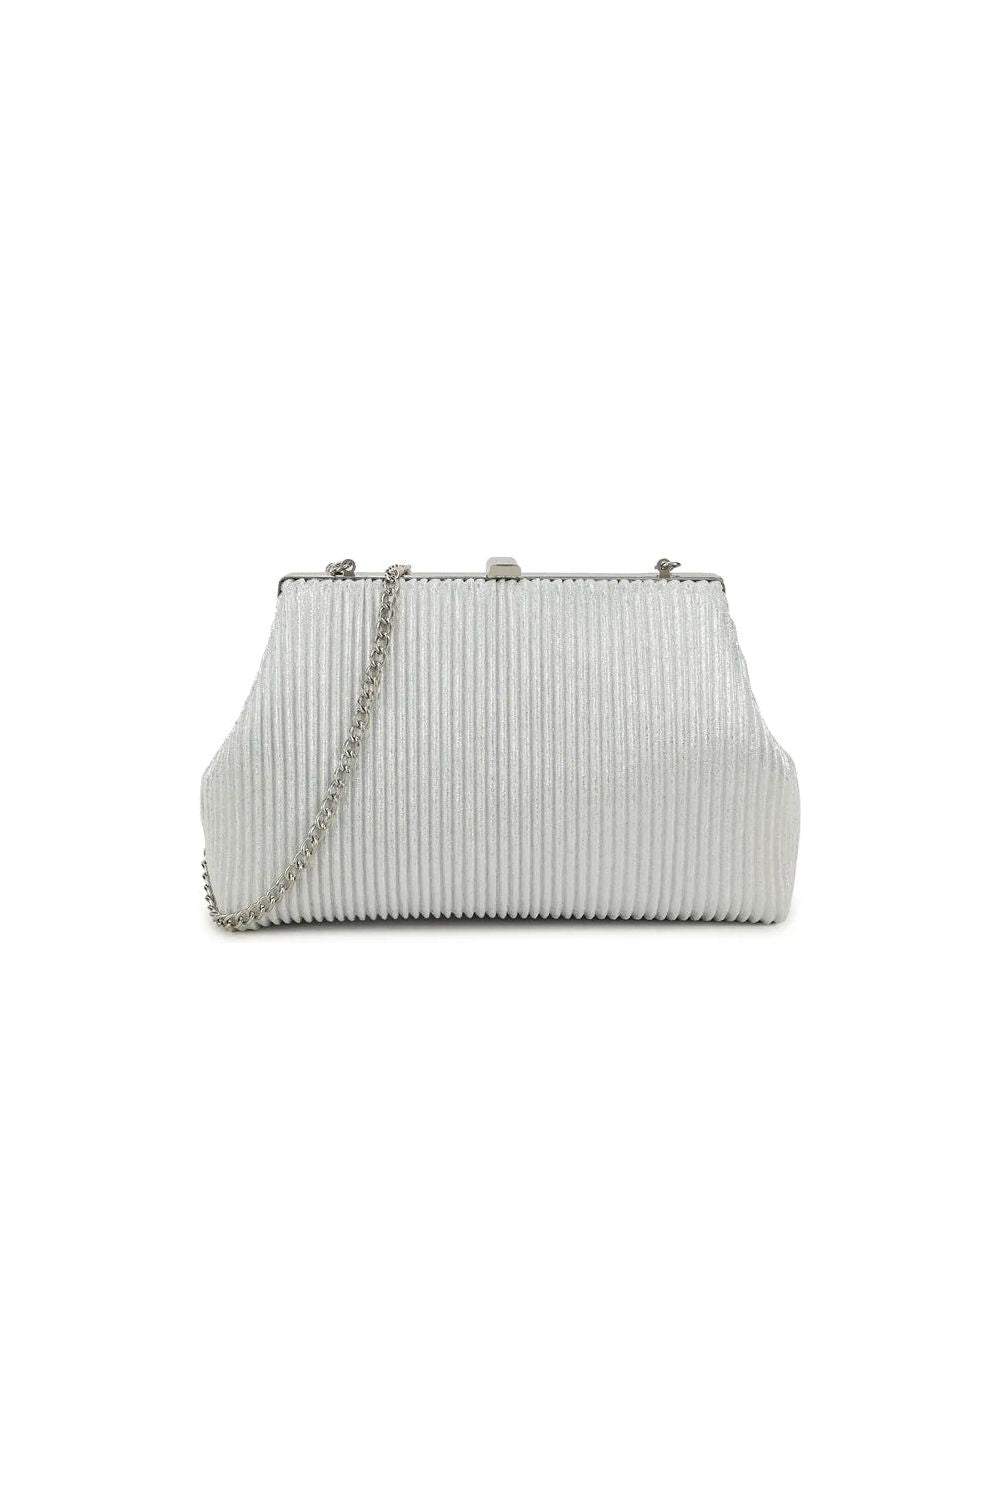 Silver Glitter Clutch Bag With Removable Chain ALZ3044